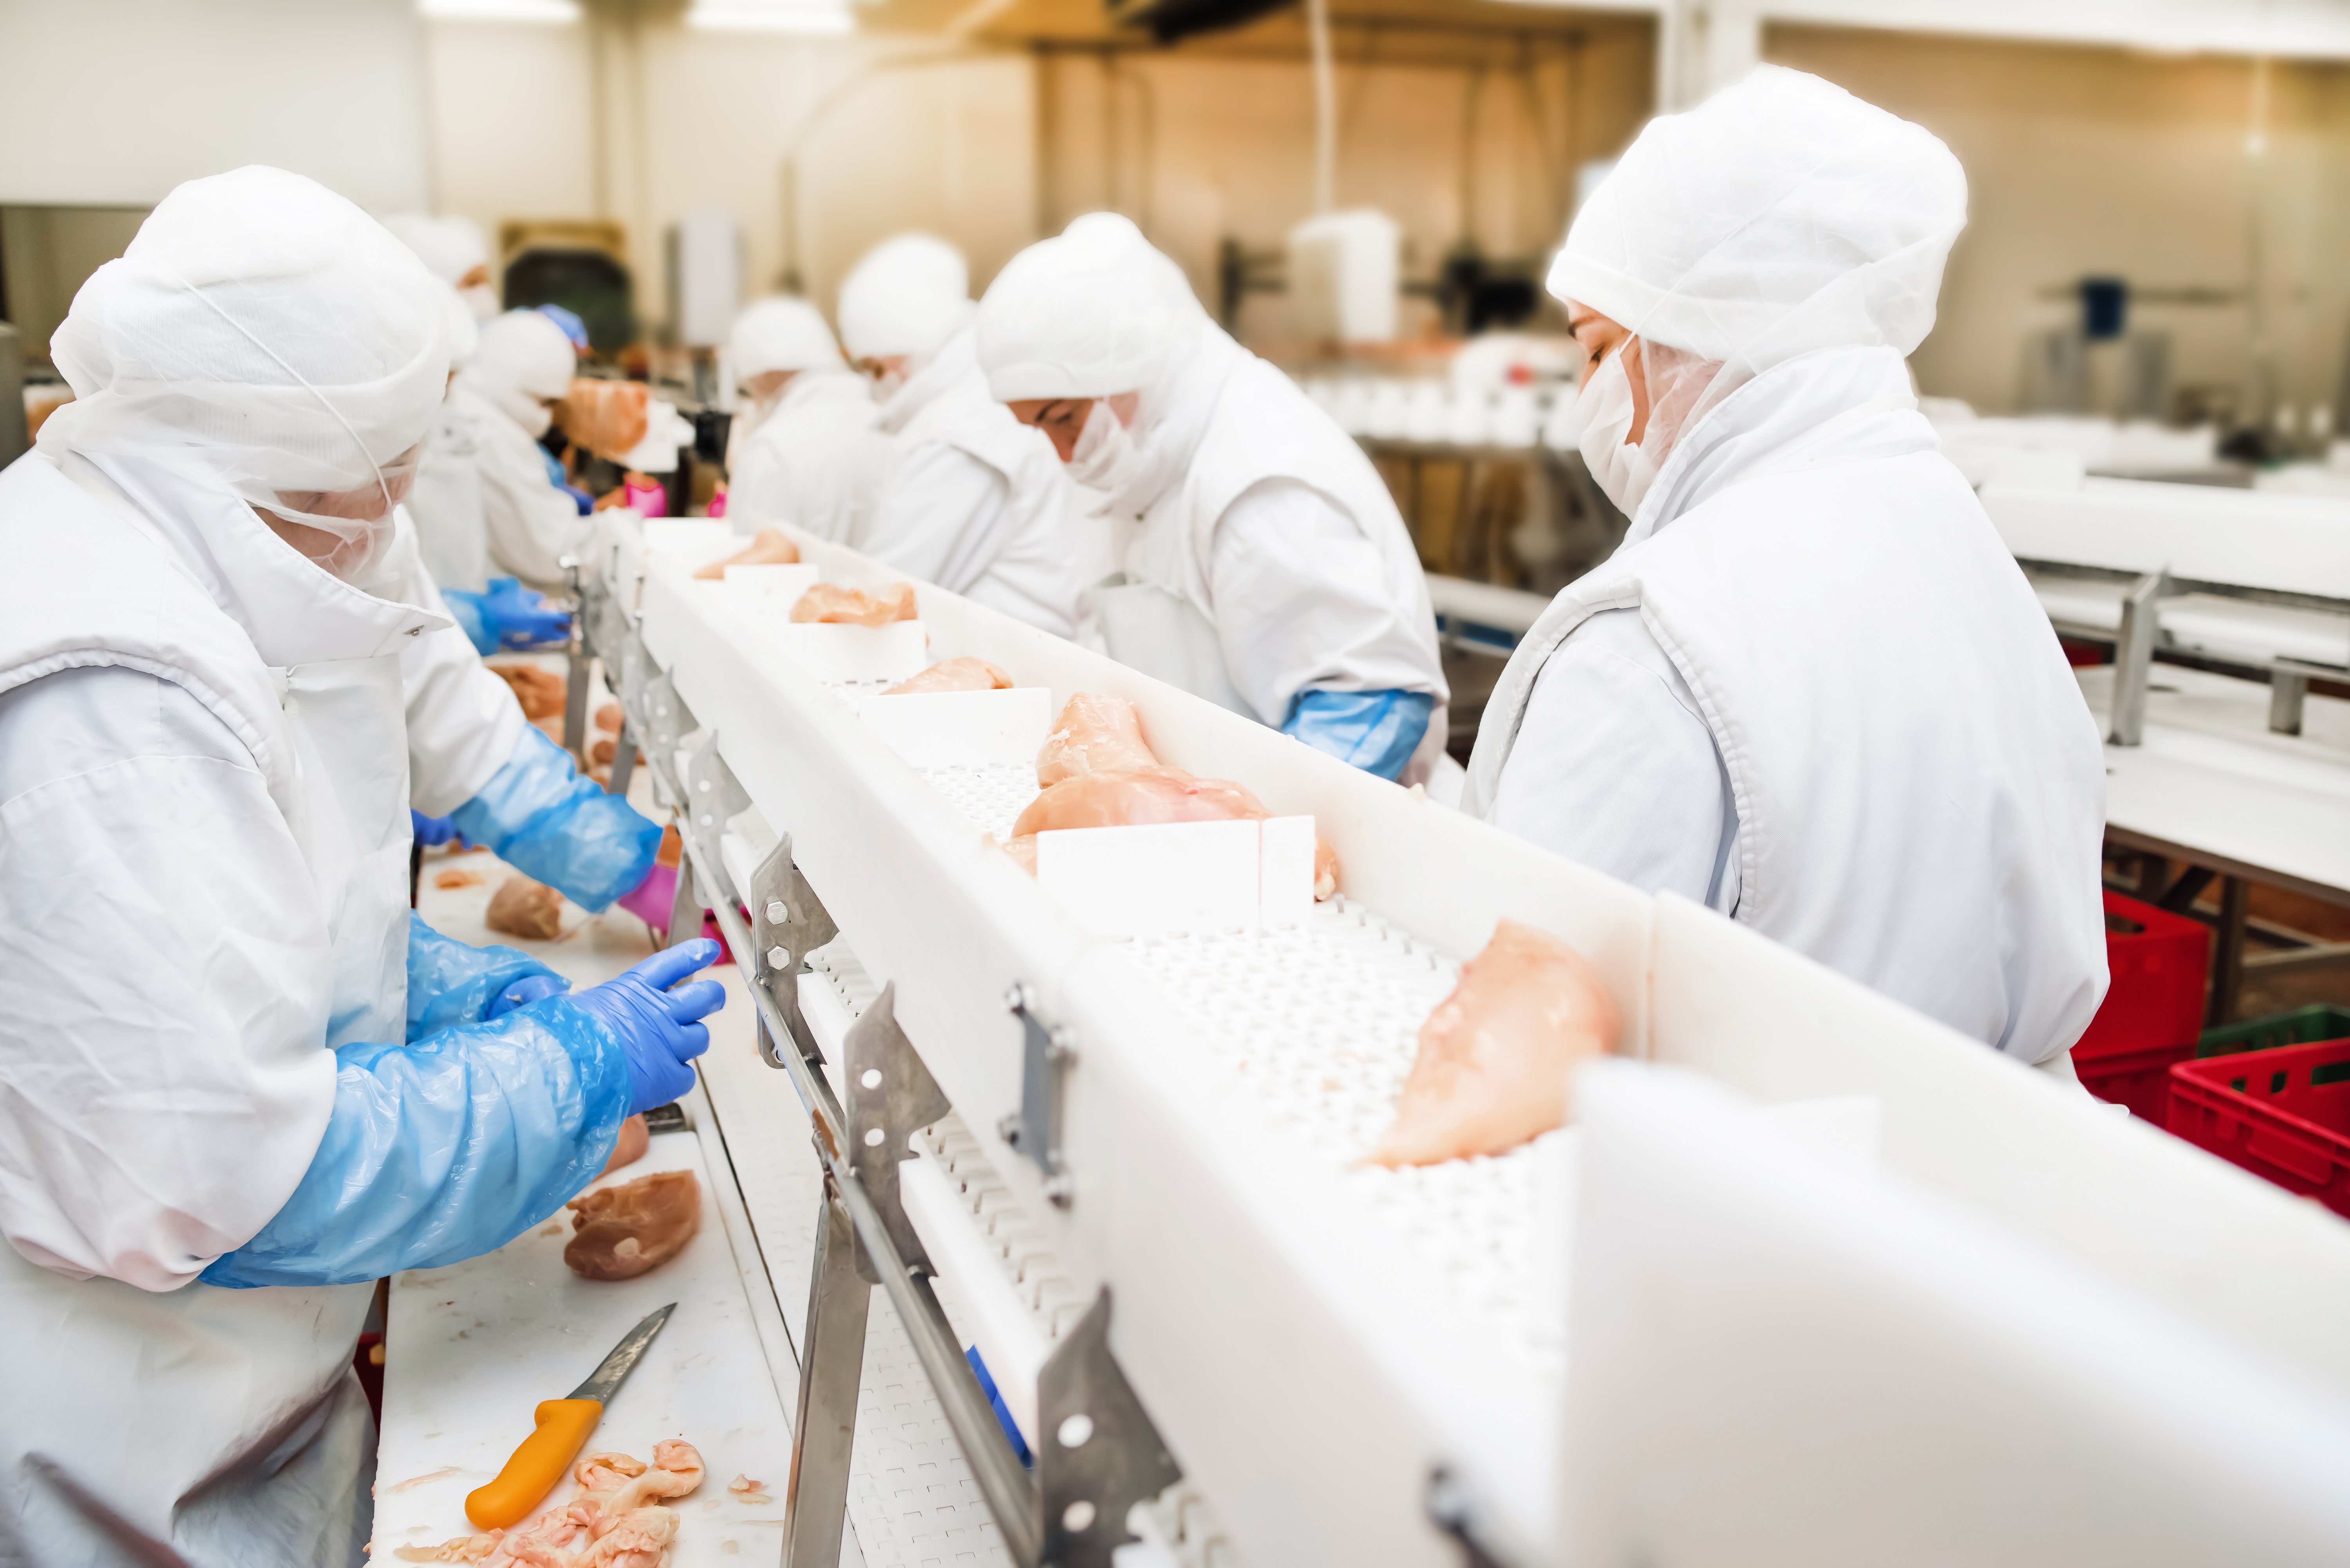 Employees at meat manufacturing facility